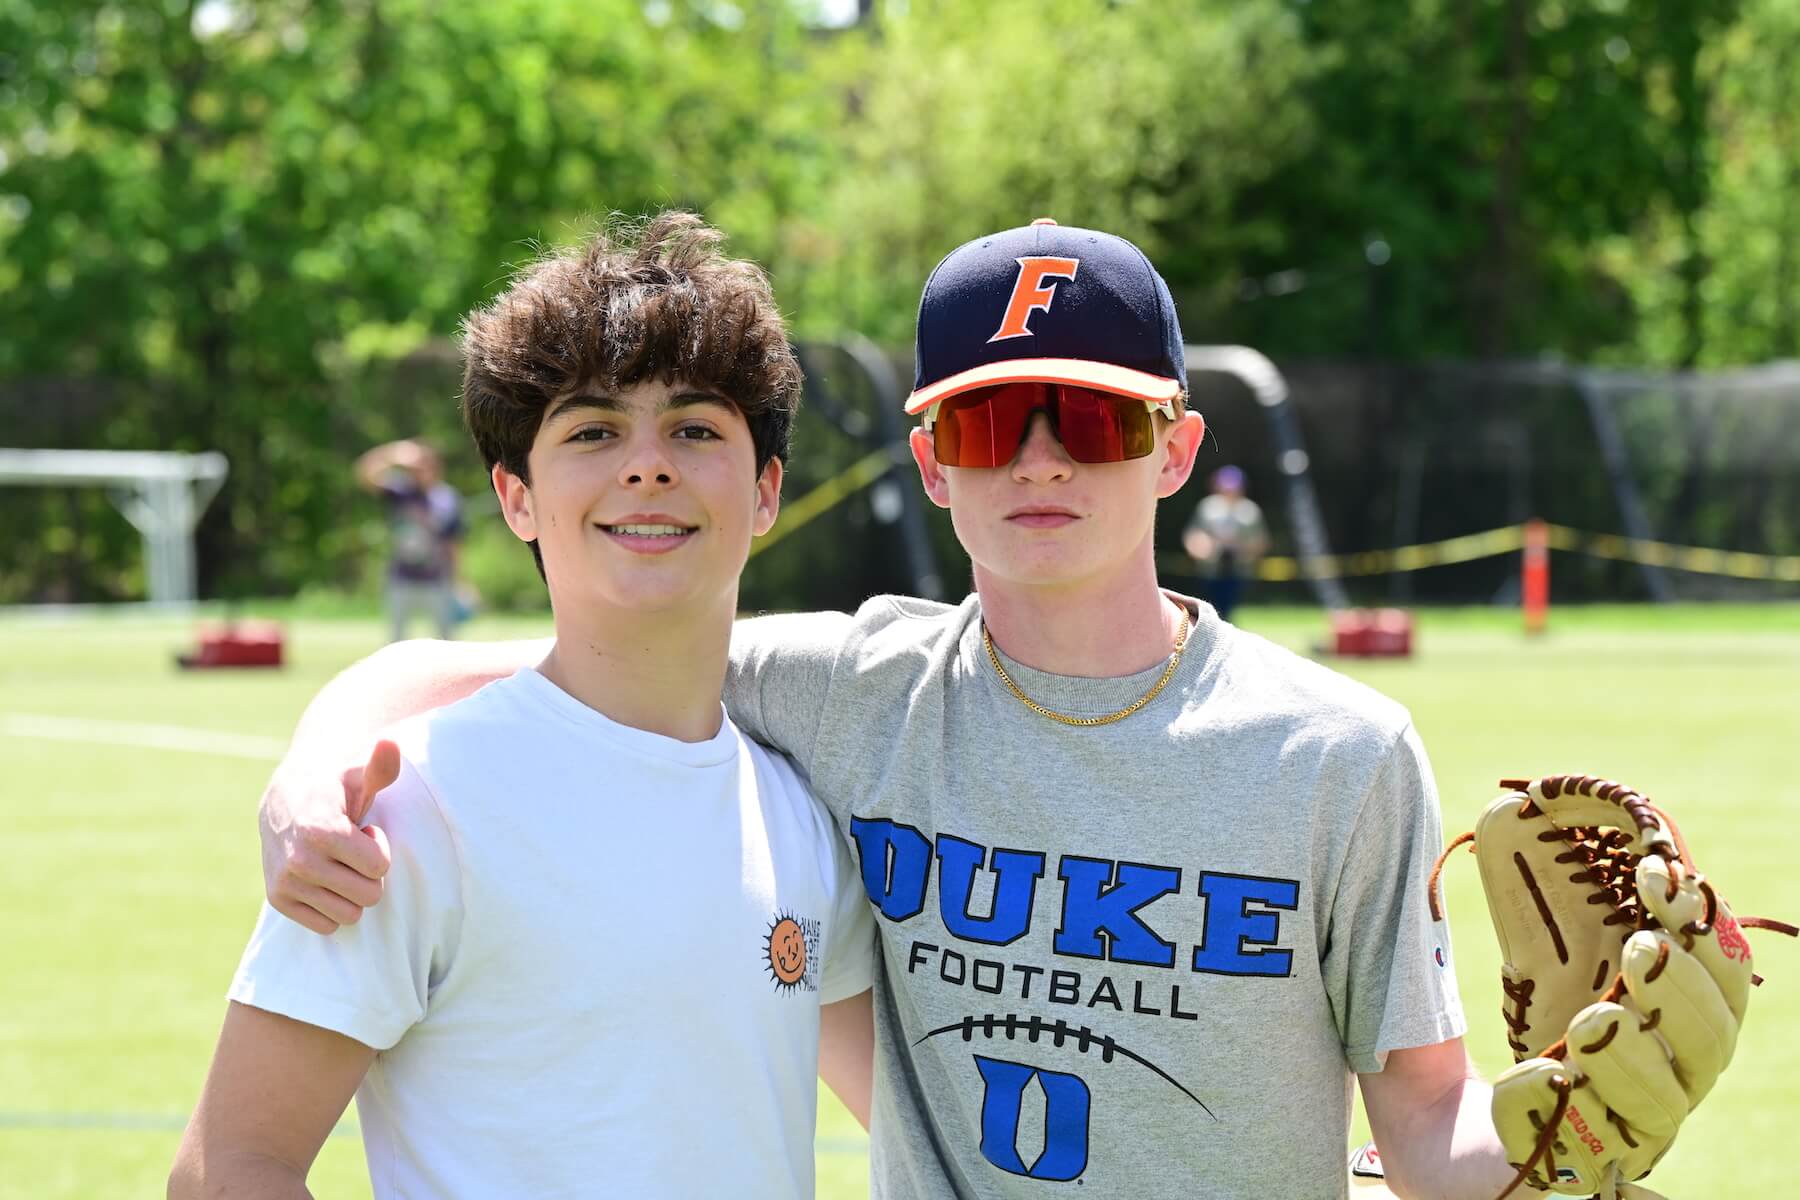 Ethical Culture Fieldston School Fieldston Middle students smile for camera on the field during baseball